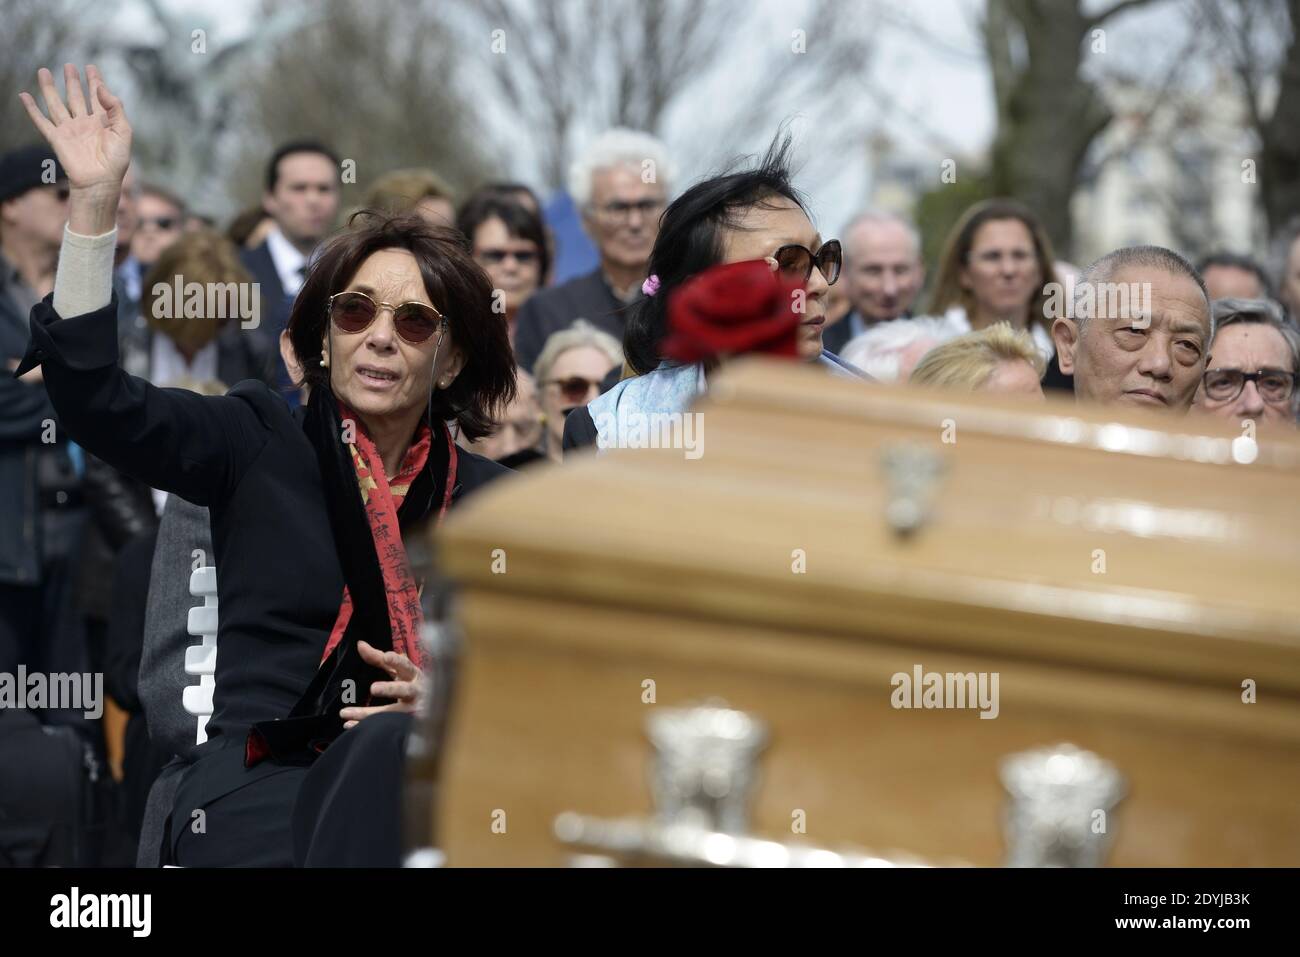 Zao Wou-Ki's family attending the funeral of Franco-Chinese painter Zao Wou-Ki who died aged 93, at the Montparnasse cemetery, in Paris, France, on April 16, 2013. Photo by Mousse/ABACAPRESS.COM Stock Photo